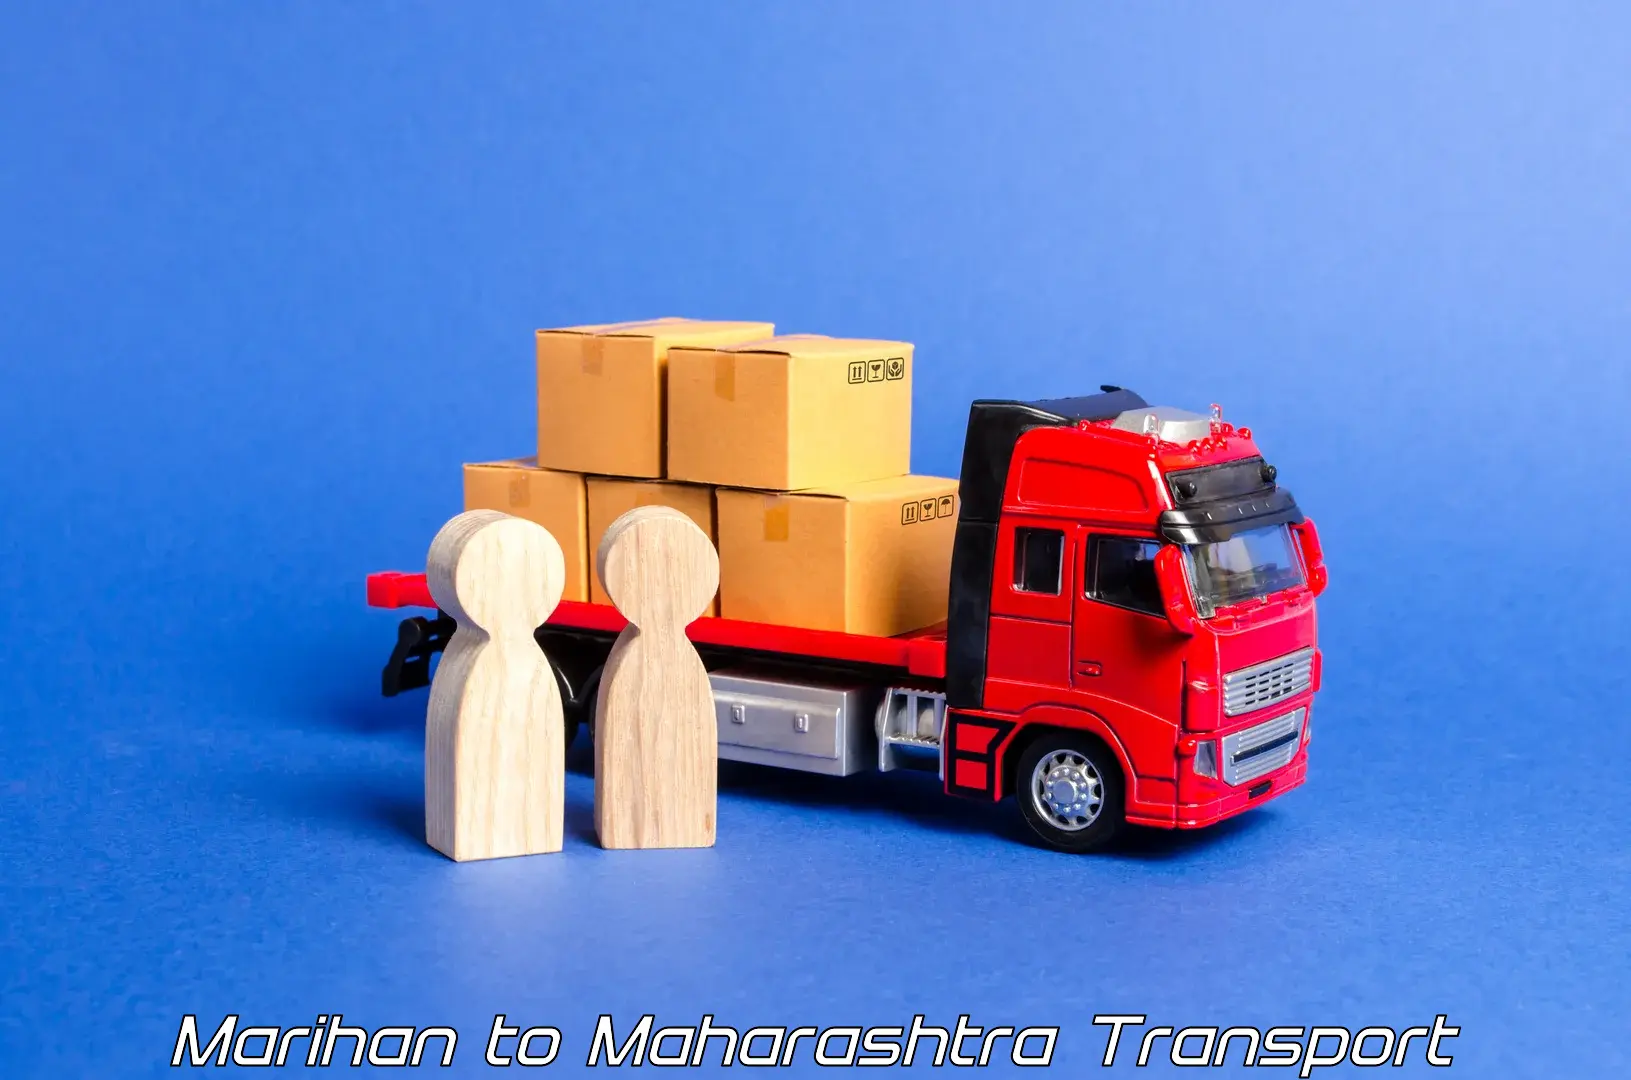 Pick up transport service in Marihan to Jath